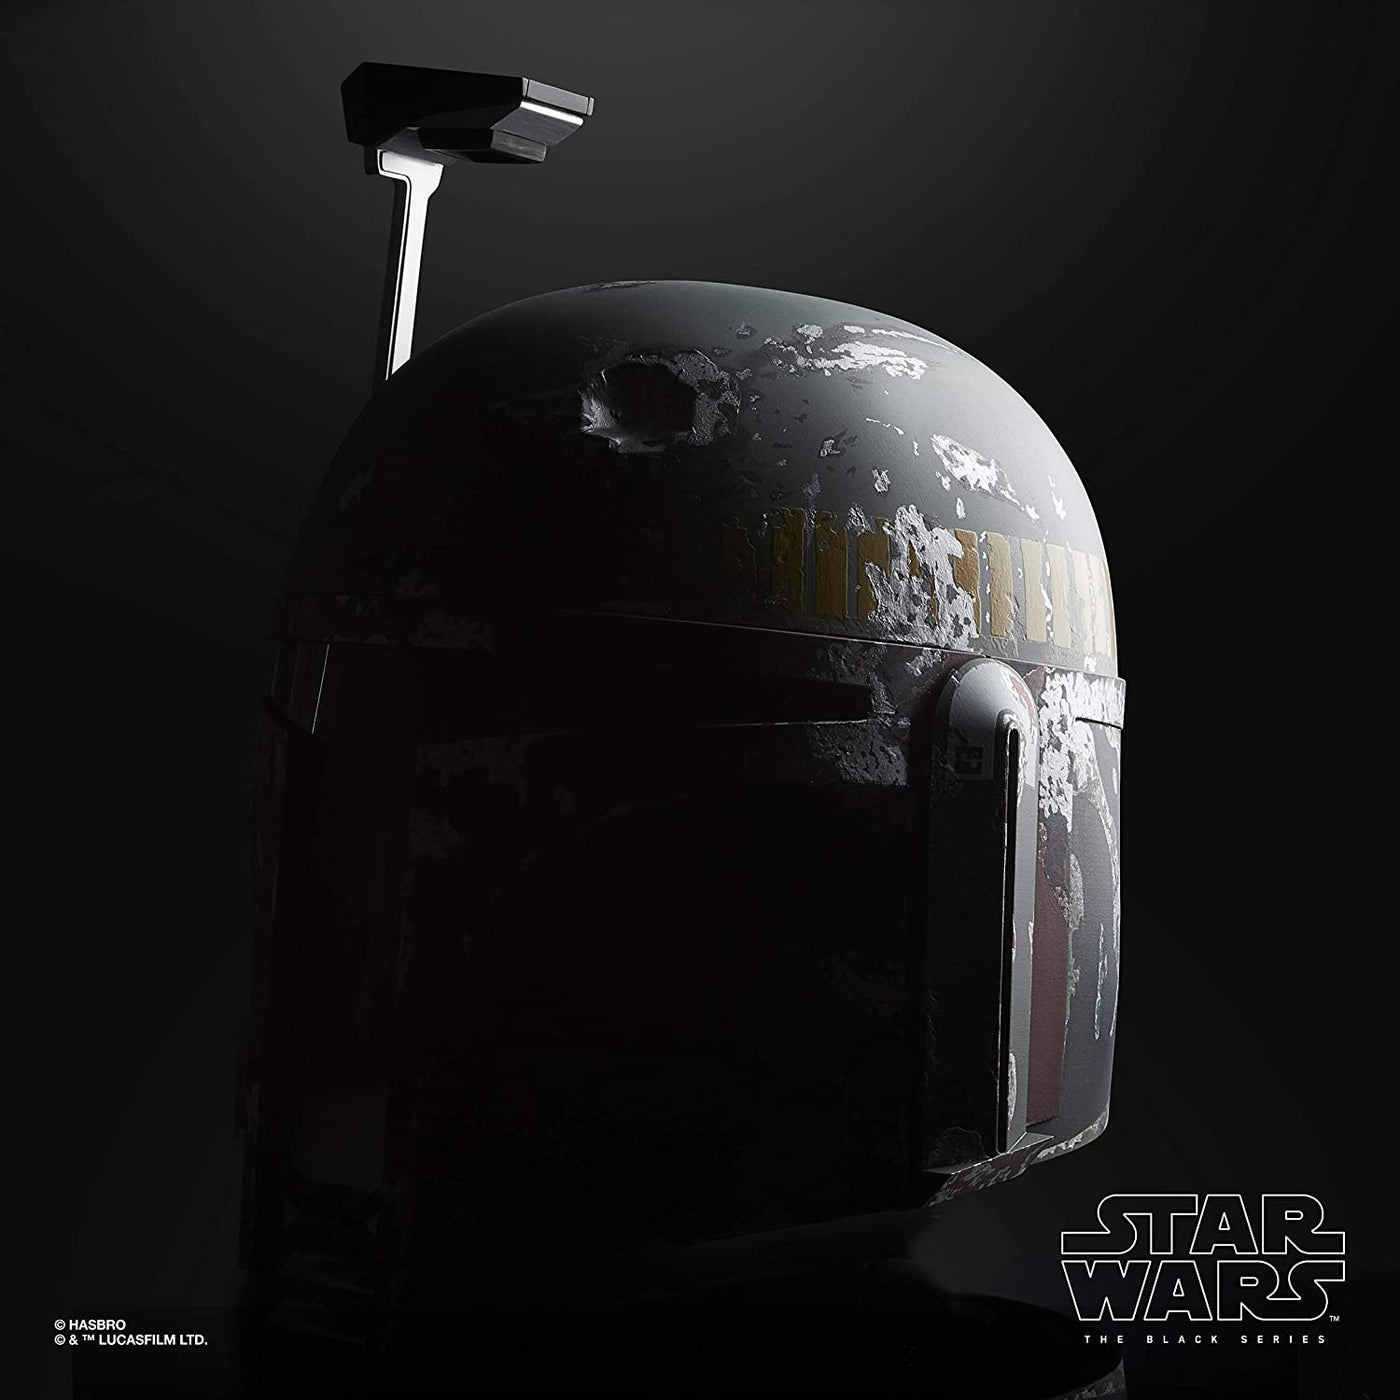 Star Wars The Black Series Boba Fett Premium Electronic Helmet, The Empire Strikes Back Full-Scale Roleplay Collectible